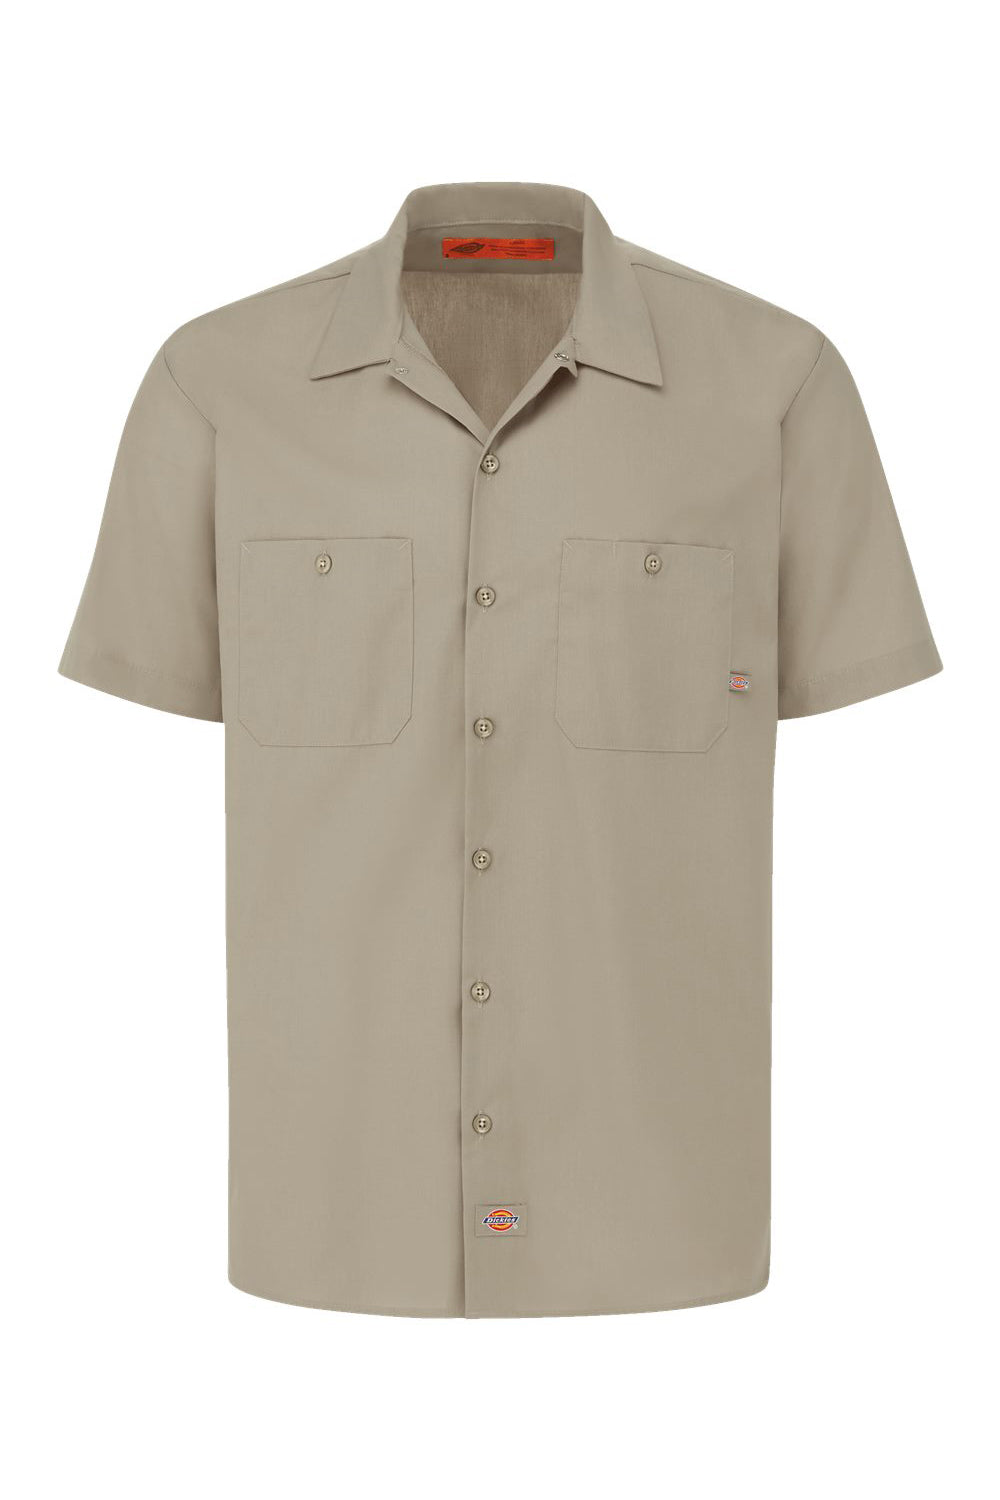 Dickies S535 Mens Industrial Wrinkle Resistant Short Sleeve Button Down Work Shirt w/ Double Pockets Desert Sand Flat Front